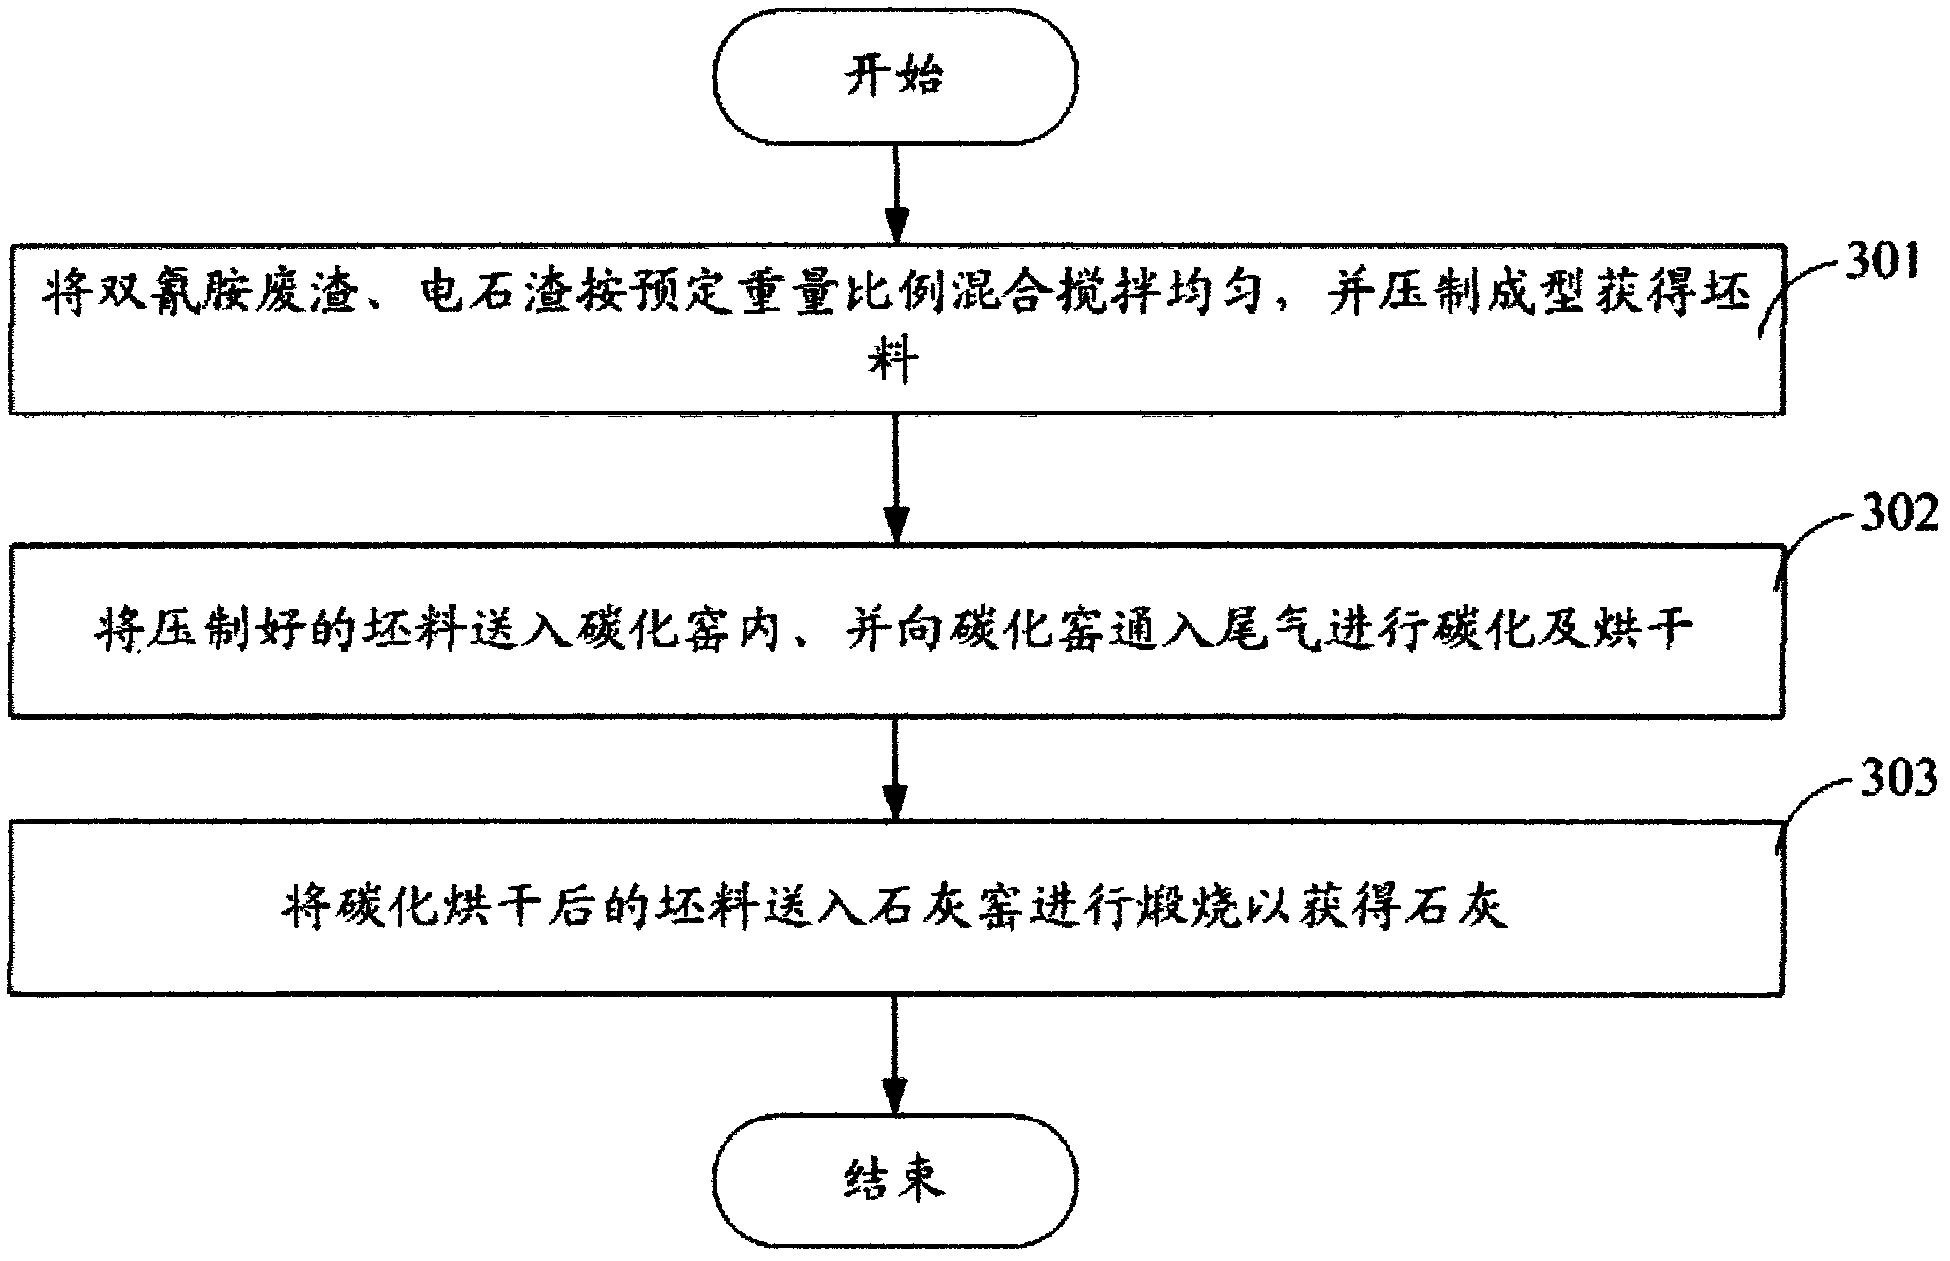 Method of utilizing dicyandiamide waste residues and carbide slag to produce lime